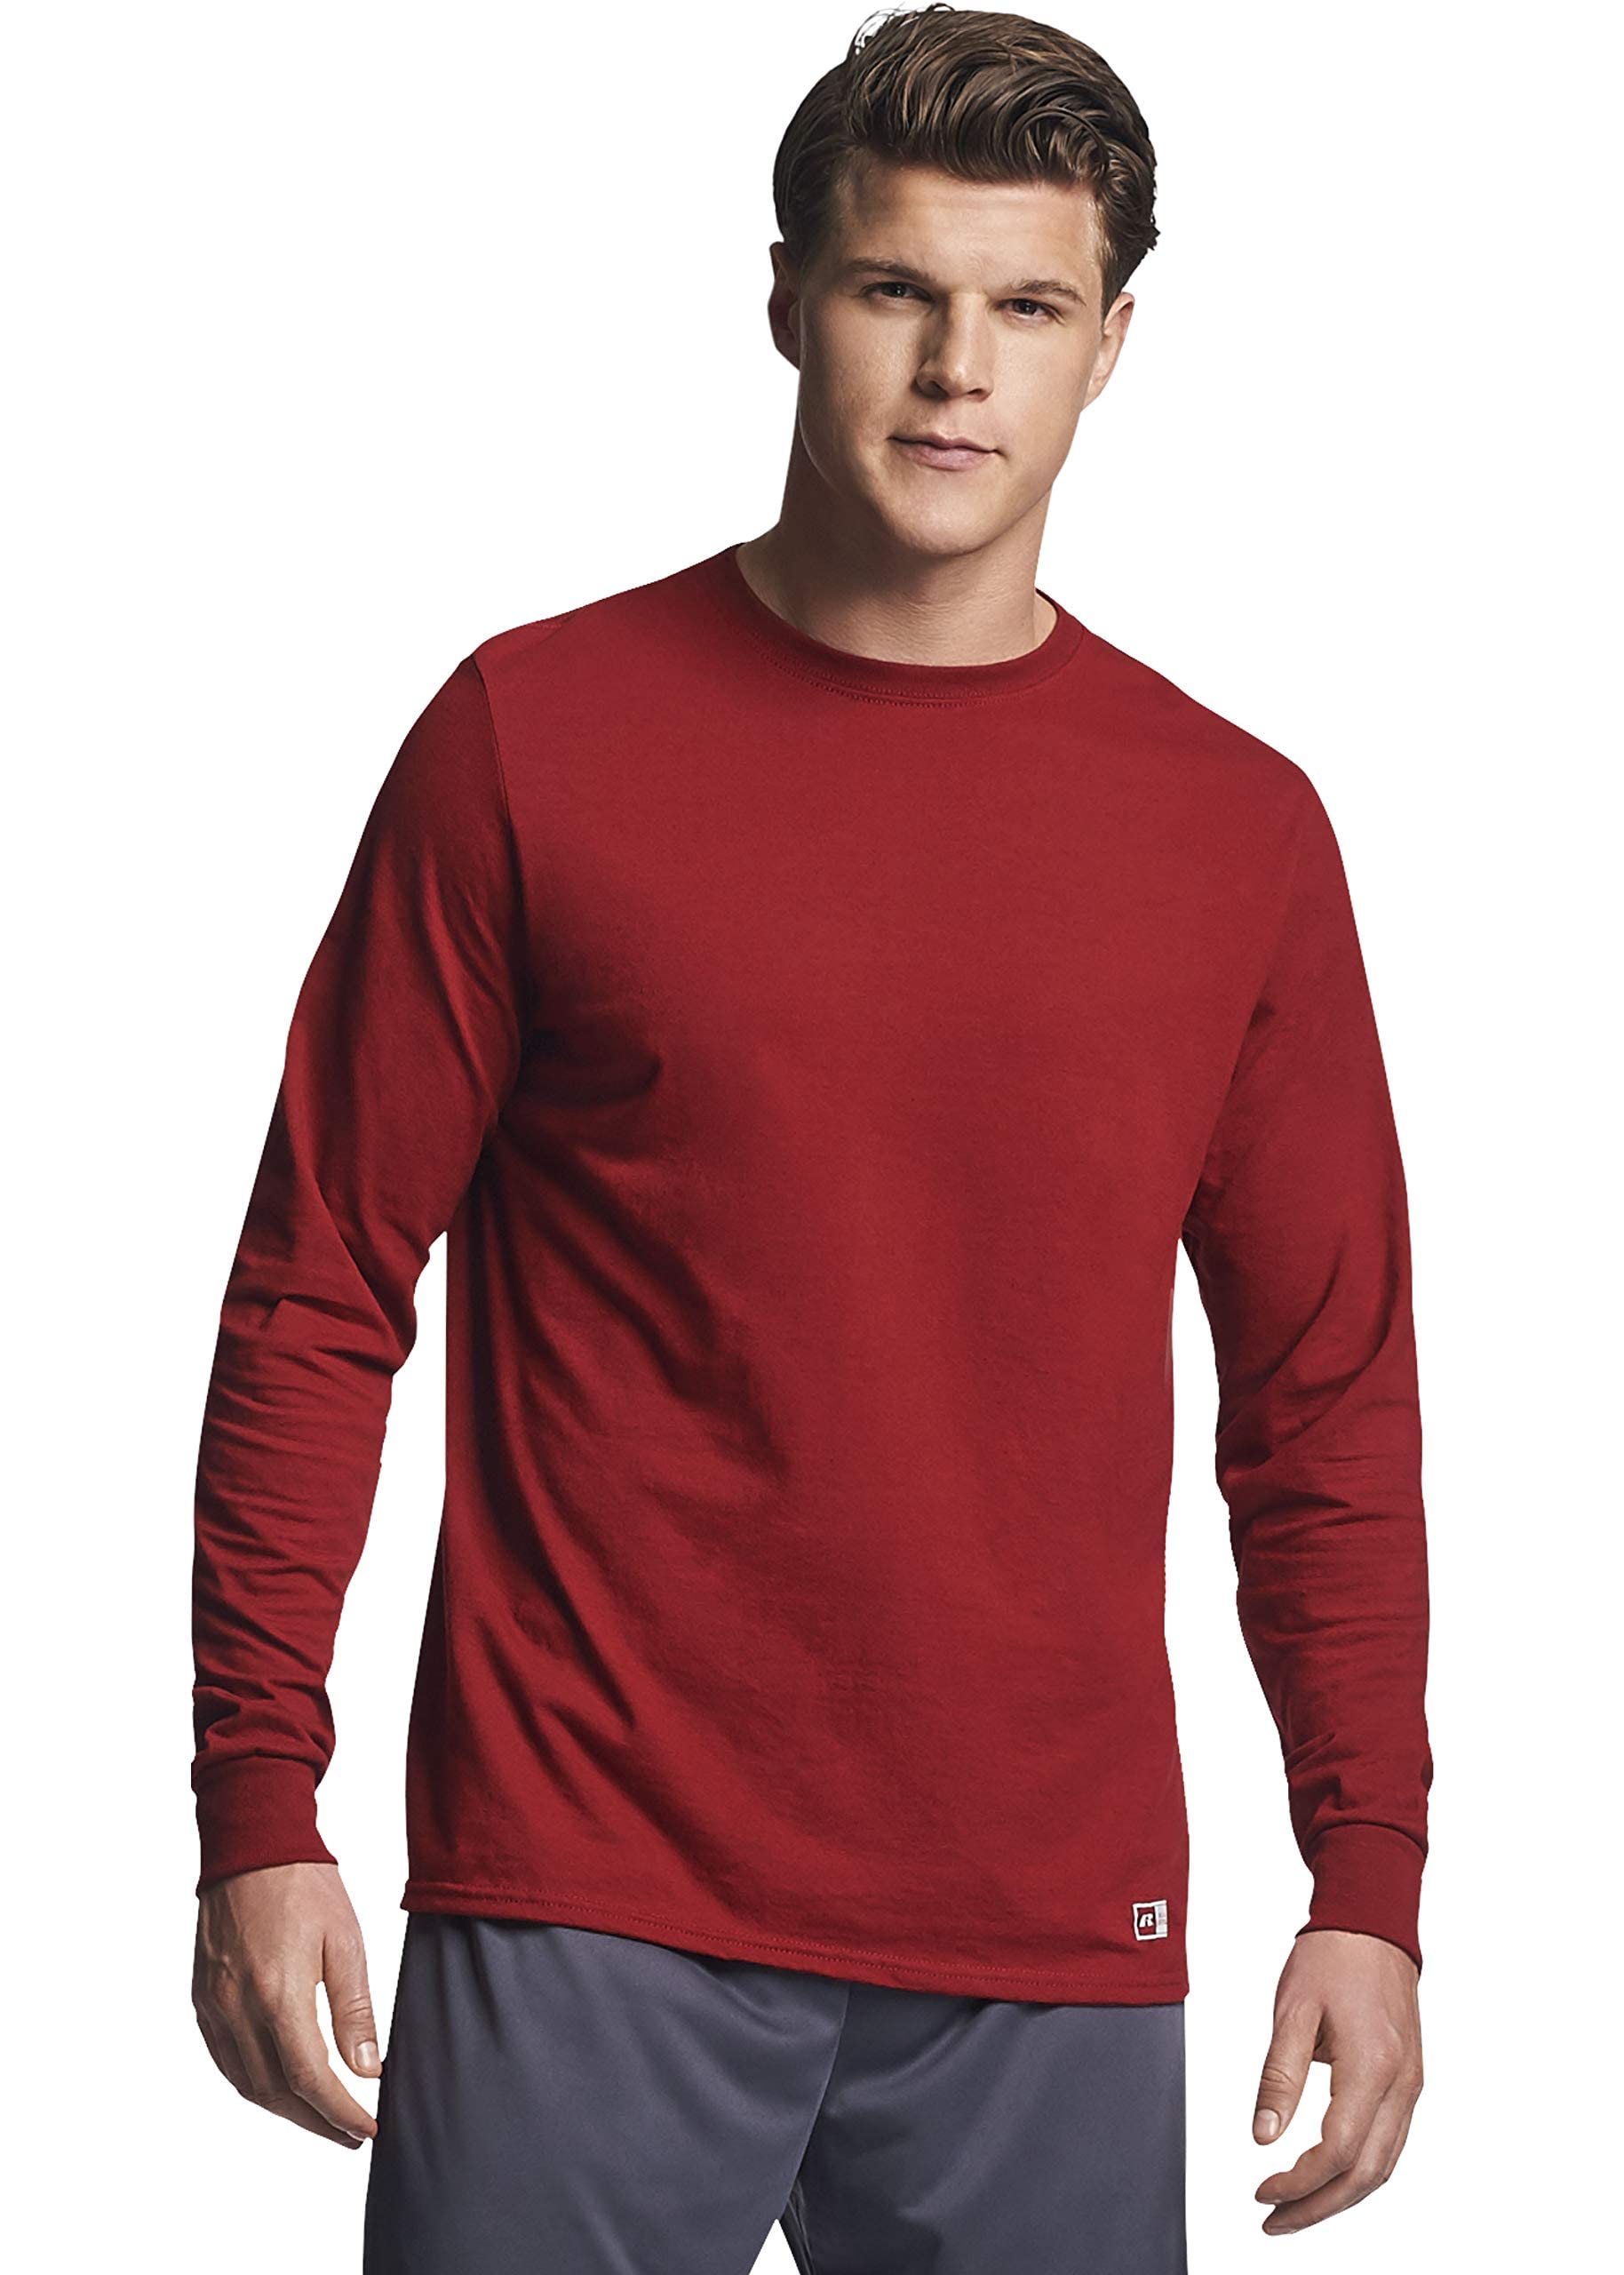 Russell Athletic Men S Dri Power Cotton Performance Long Sleeve Tee W